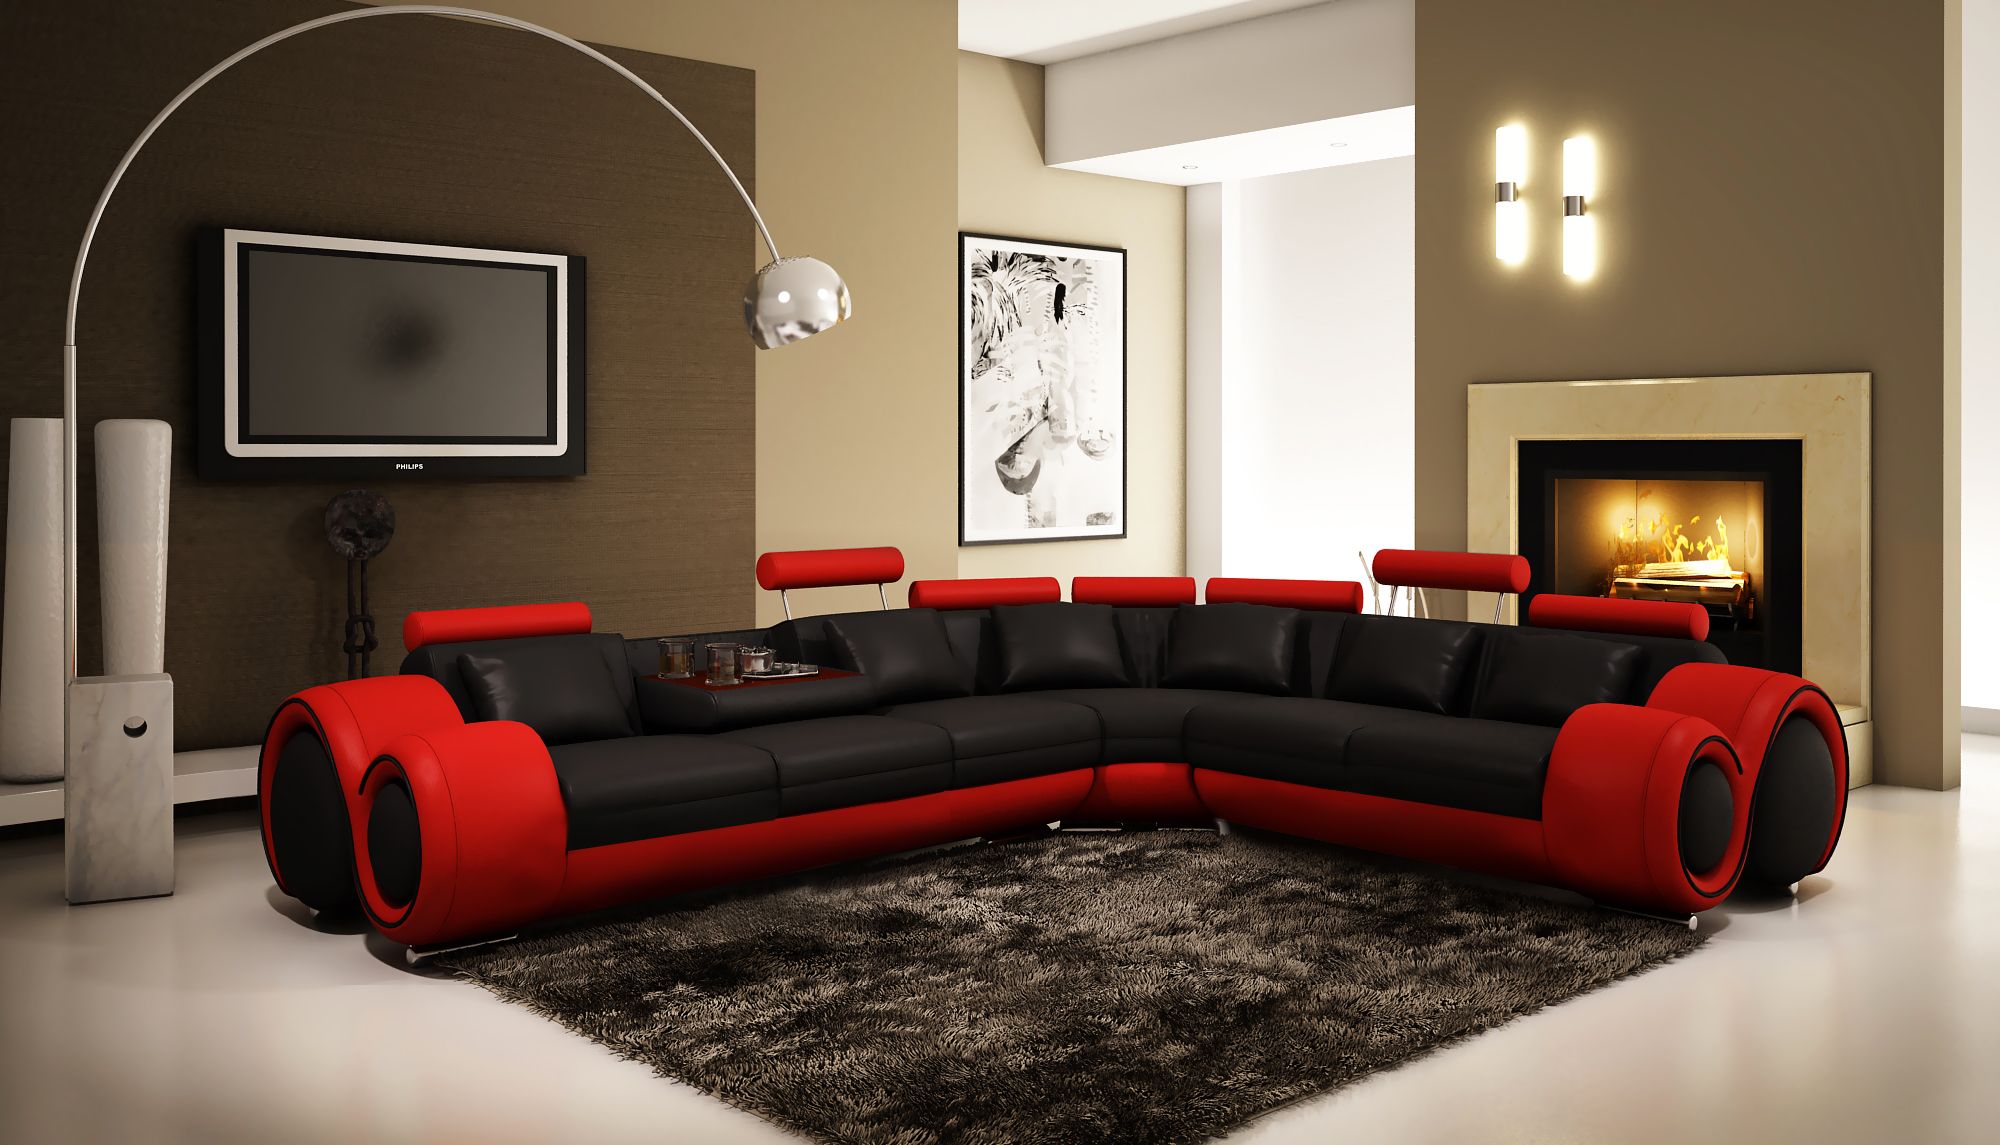 6 Great Ideas Of Interior Design With Reclining Sectional Sofas